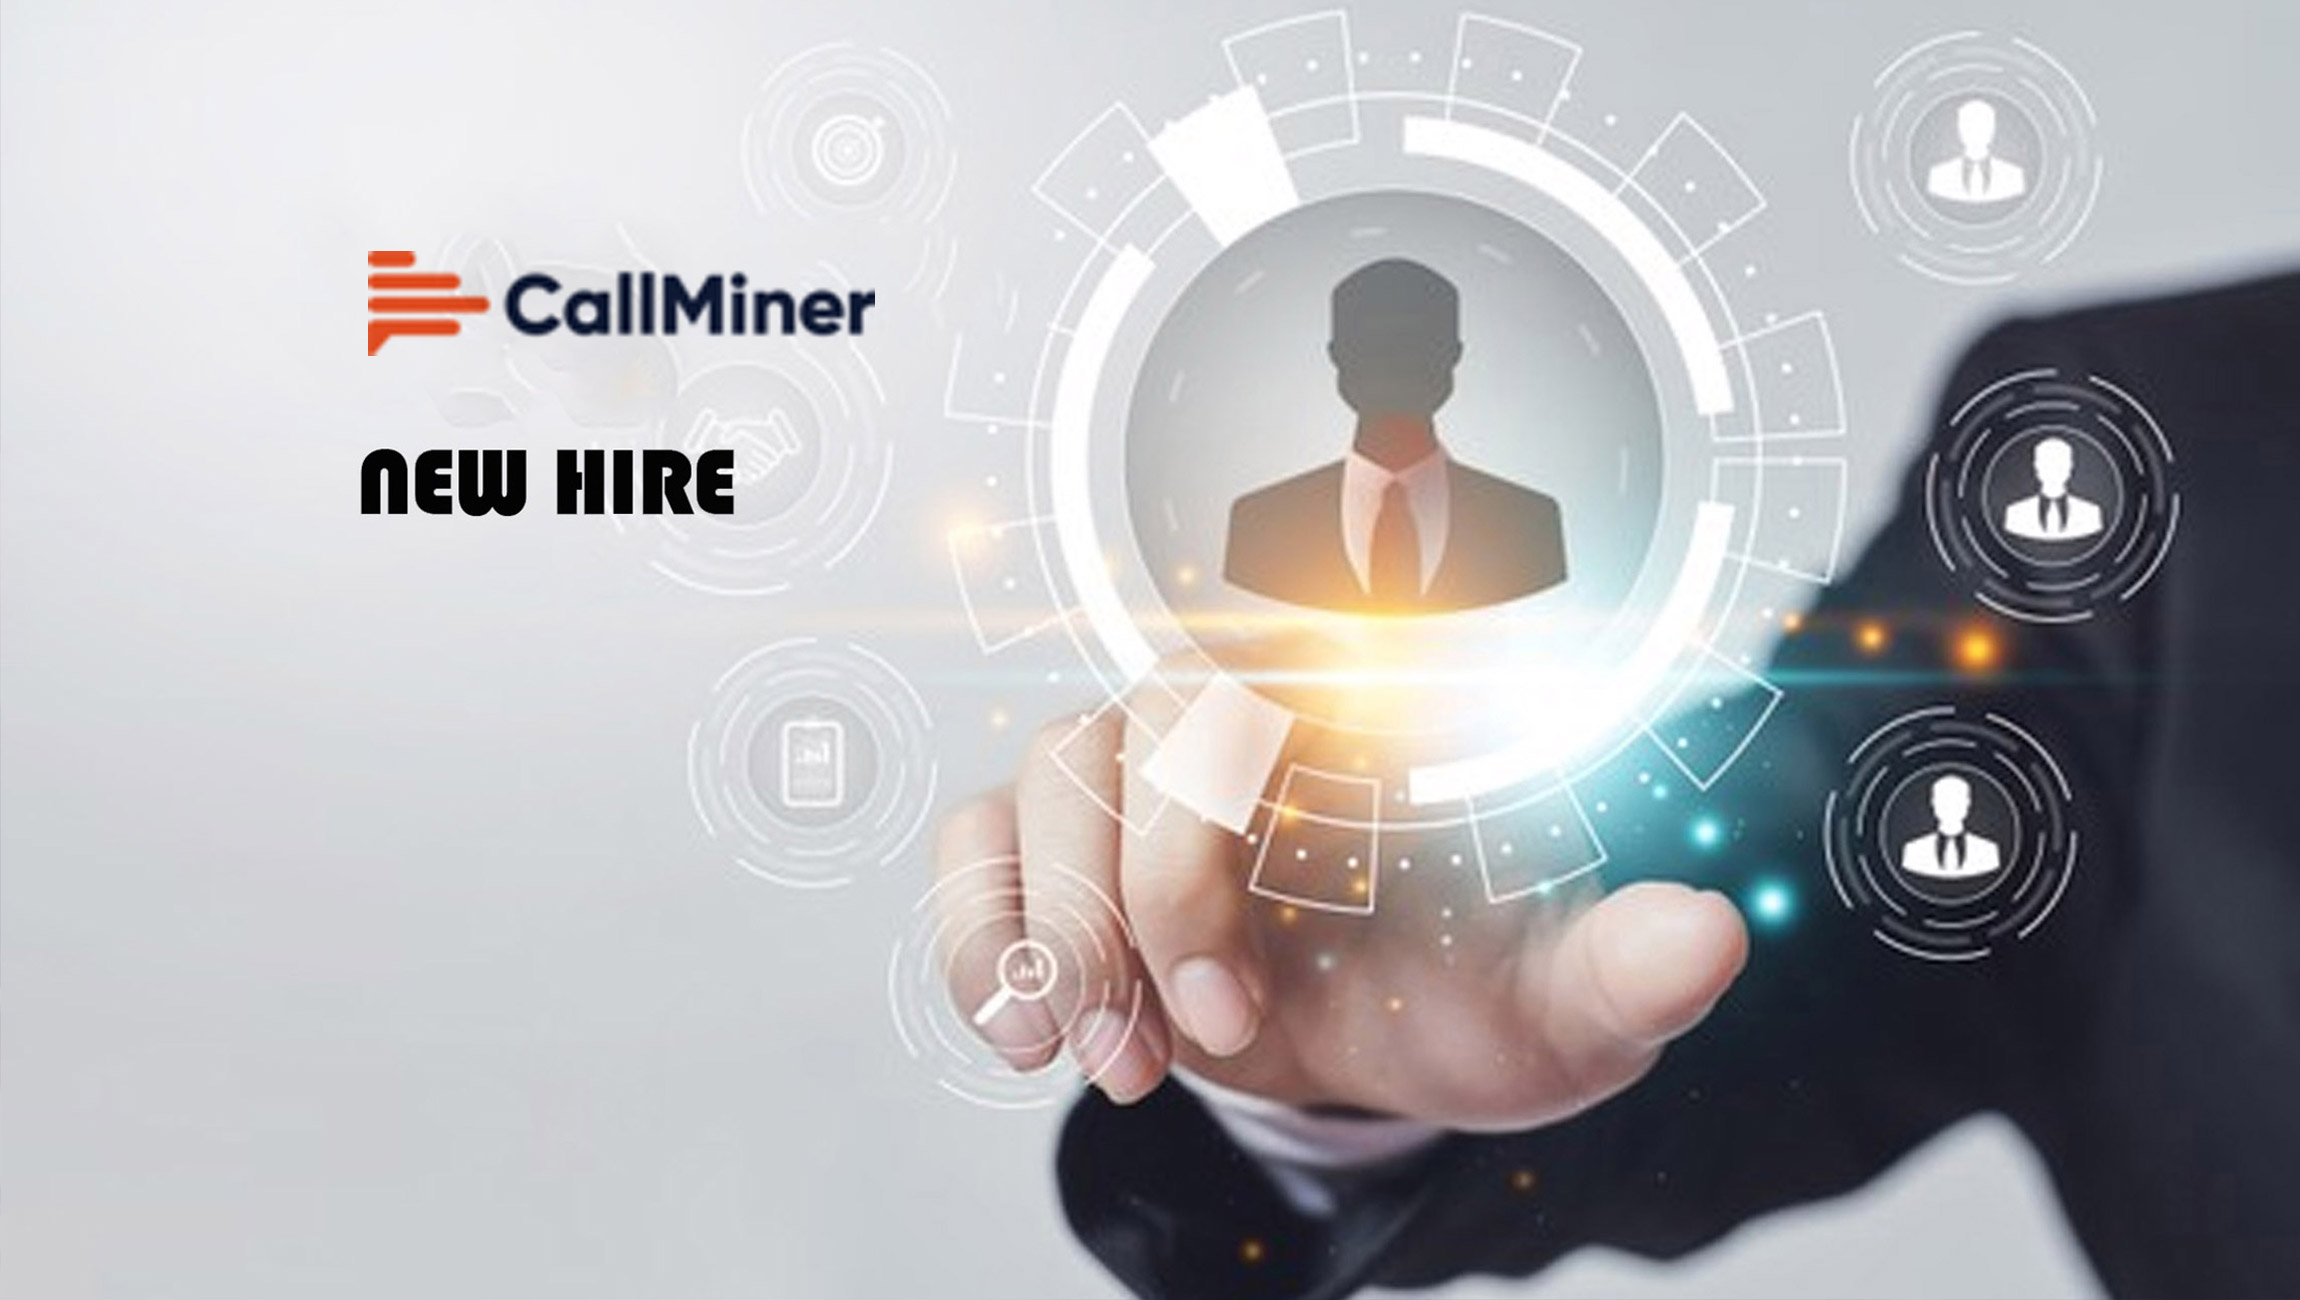 CallMiner Appoints Rachel Simone as Chief Information Officer